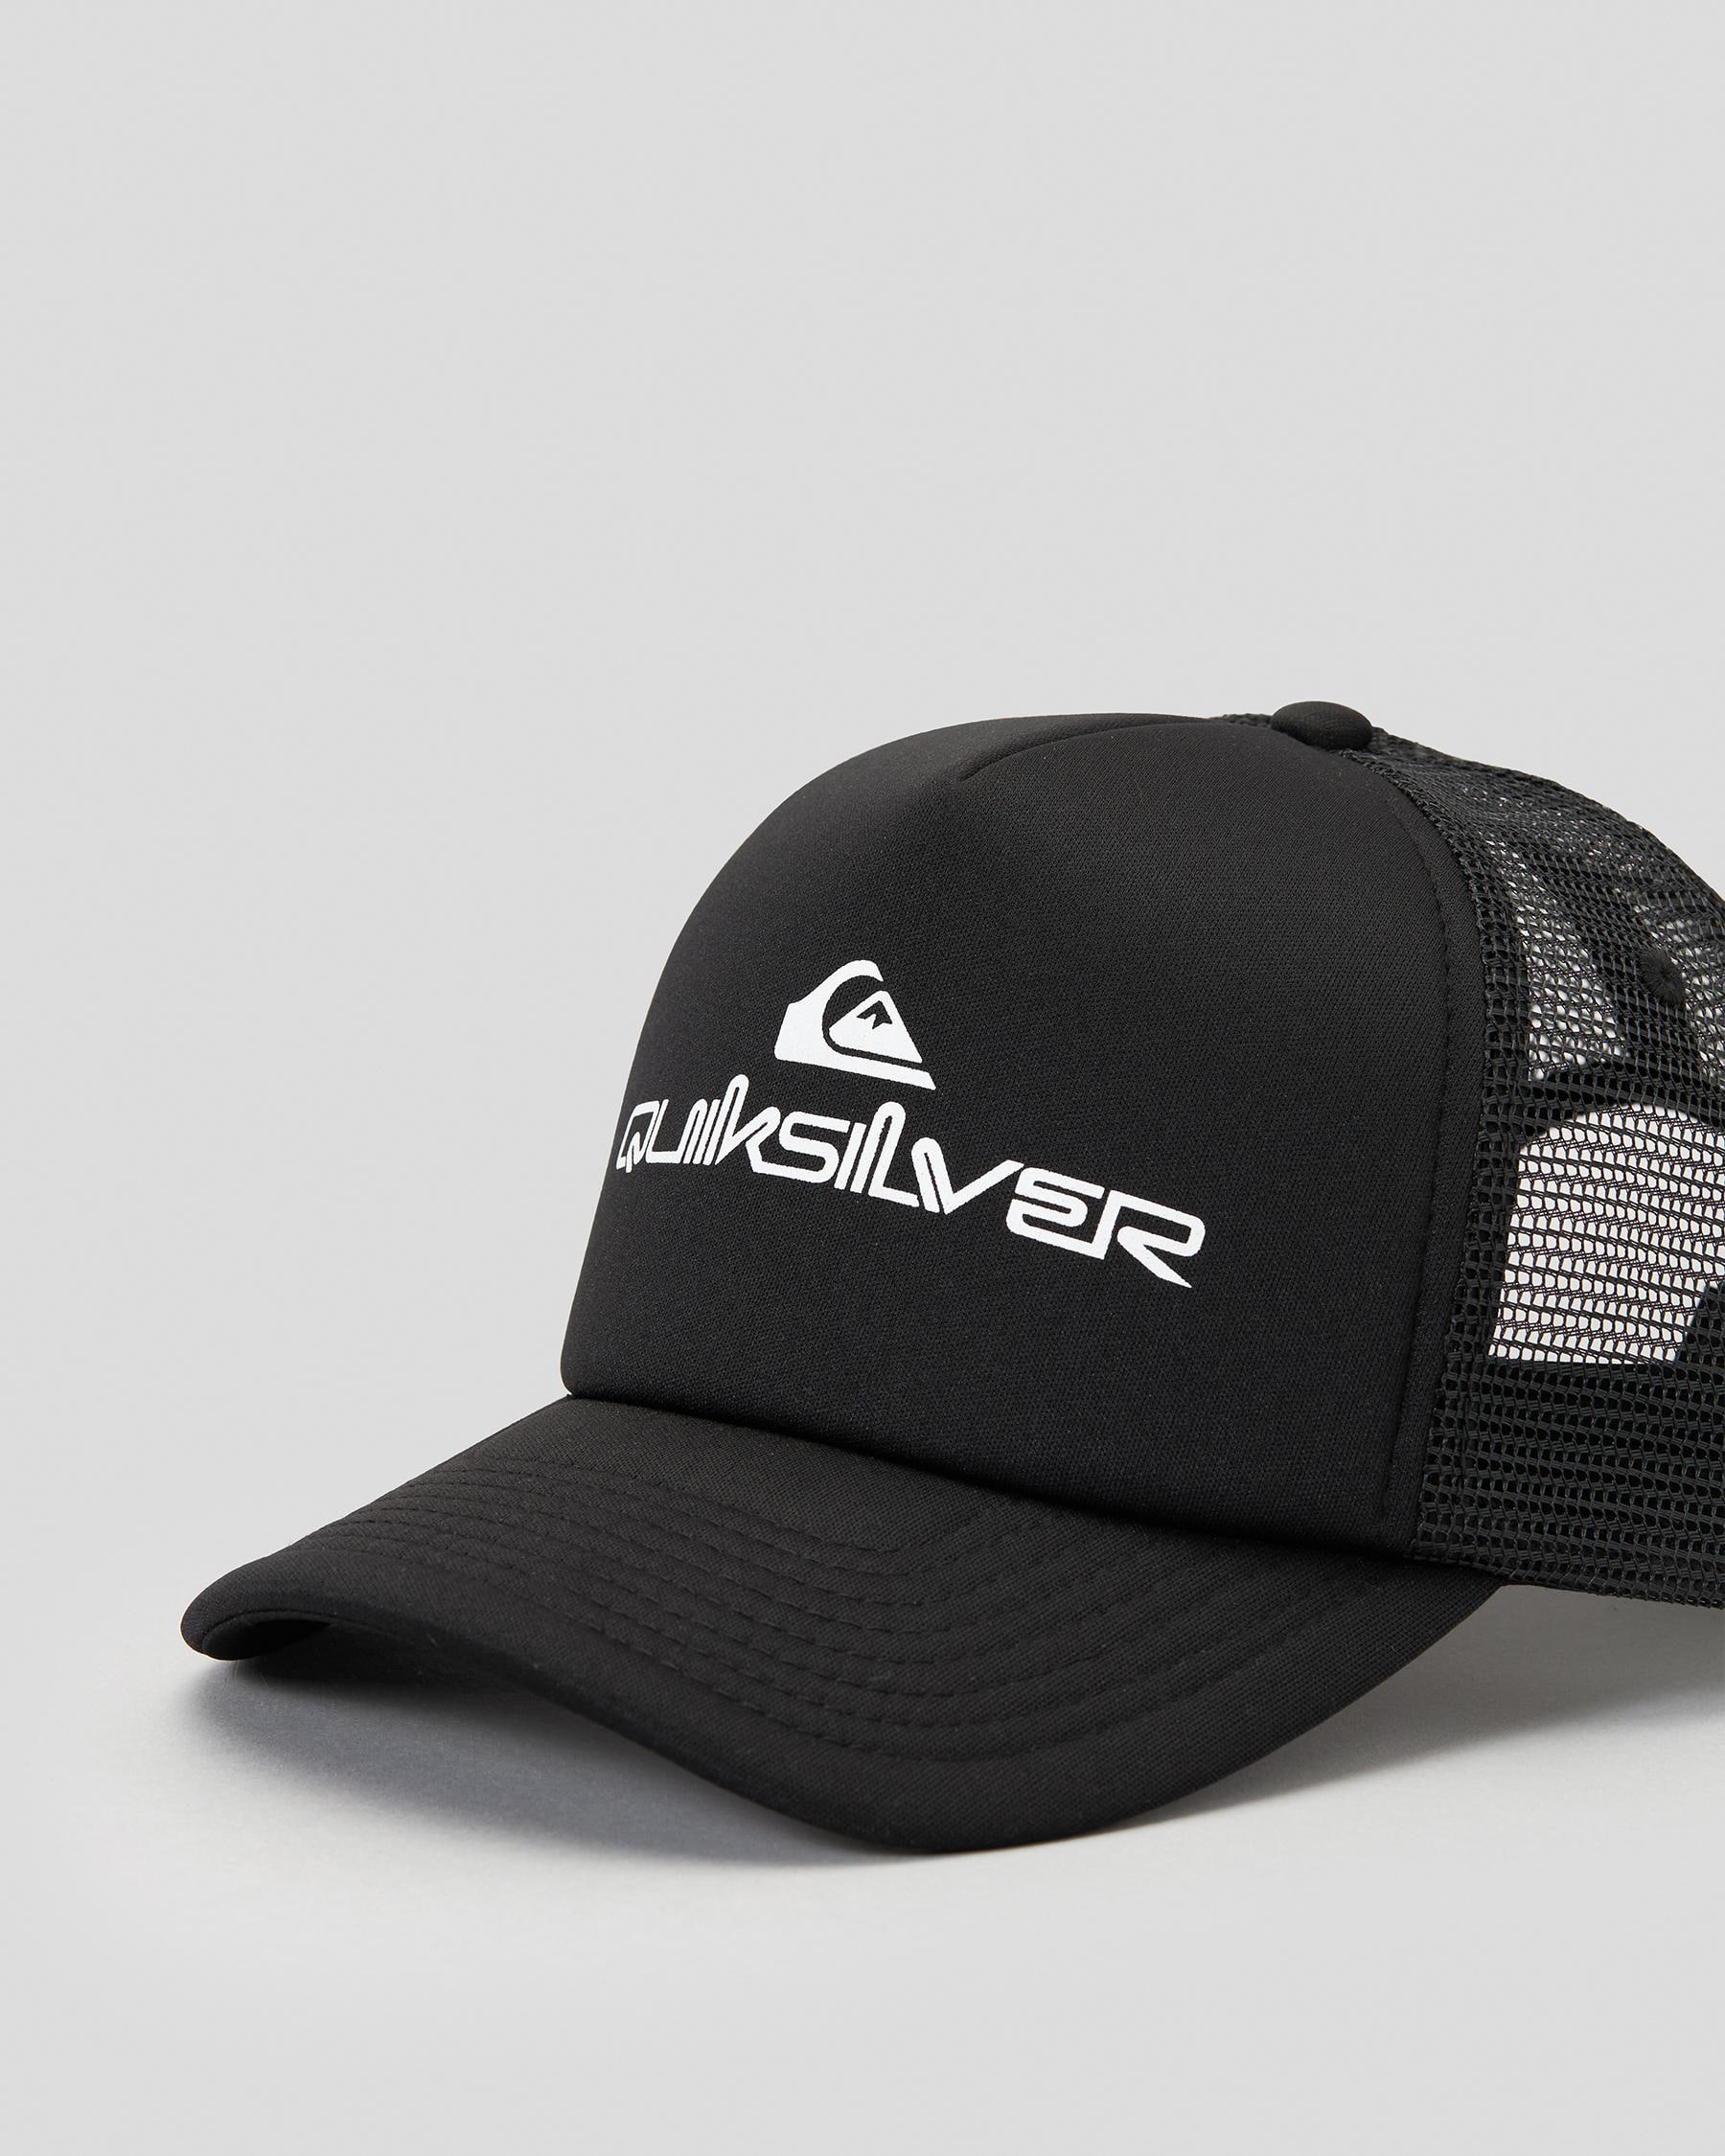 Easy United City - Black Trucker Omnistack States Cap Quiksilver FREE* & Shipping Beach - In Returns